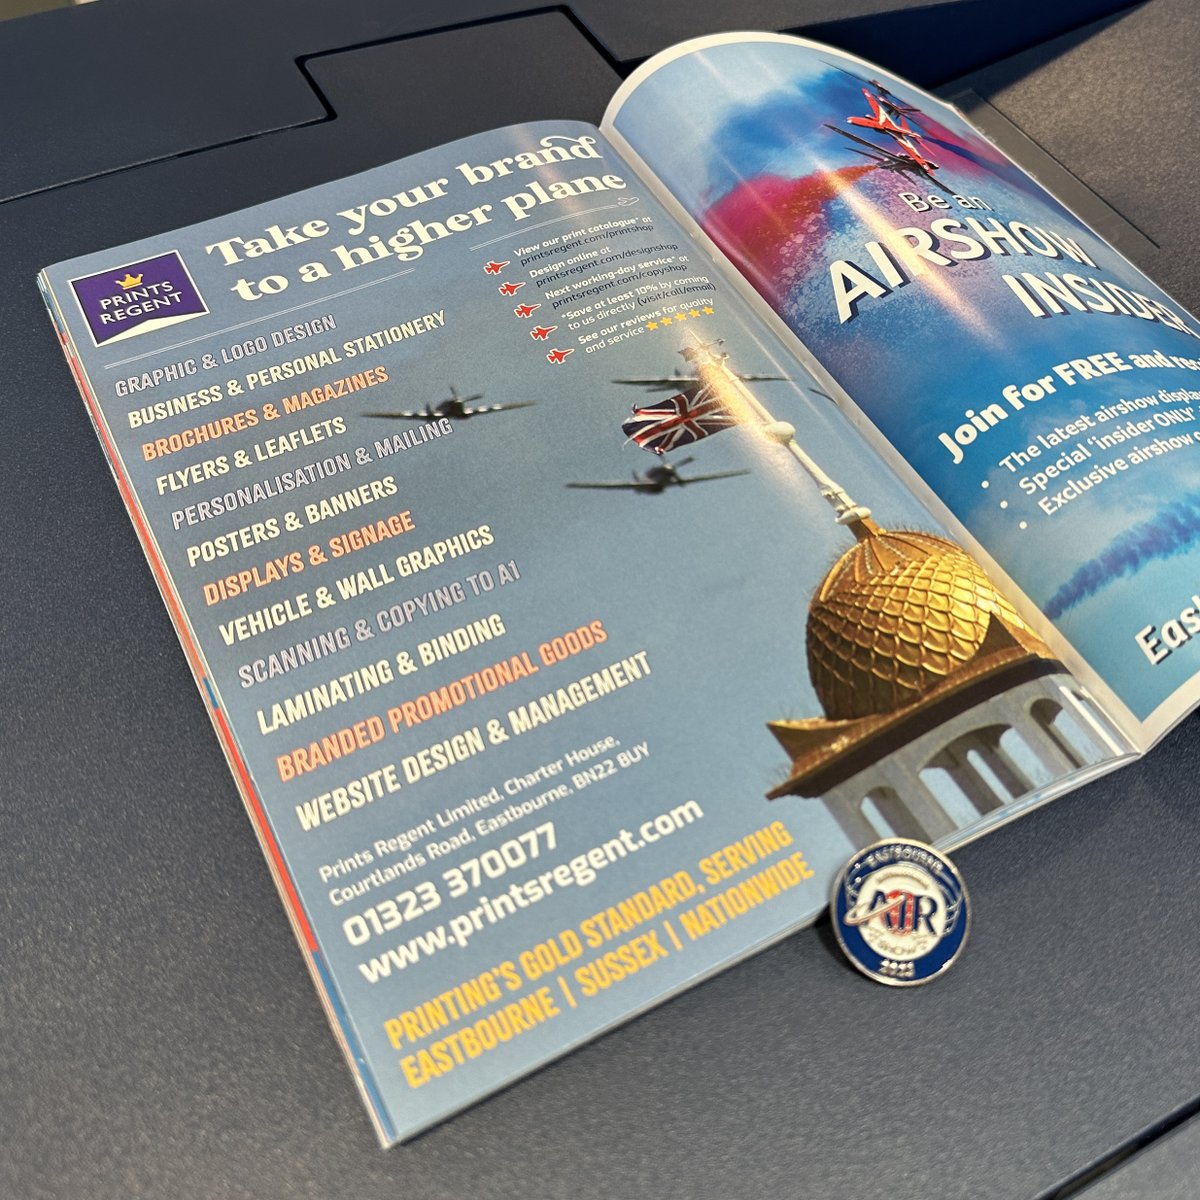 We are delighted to support the wonderful Eastbourne International Airshow, which begins tomorrow and finishes on Sunday. See our adverts on the large screen and in the programme, or pay us a visit while you're in town tomorrow (we will be closed on Friday to watch it ourselves).